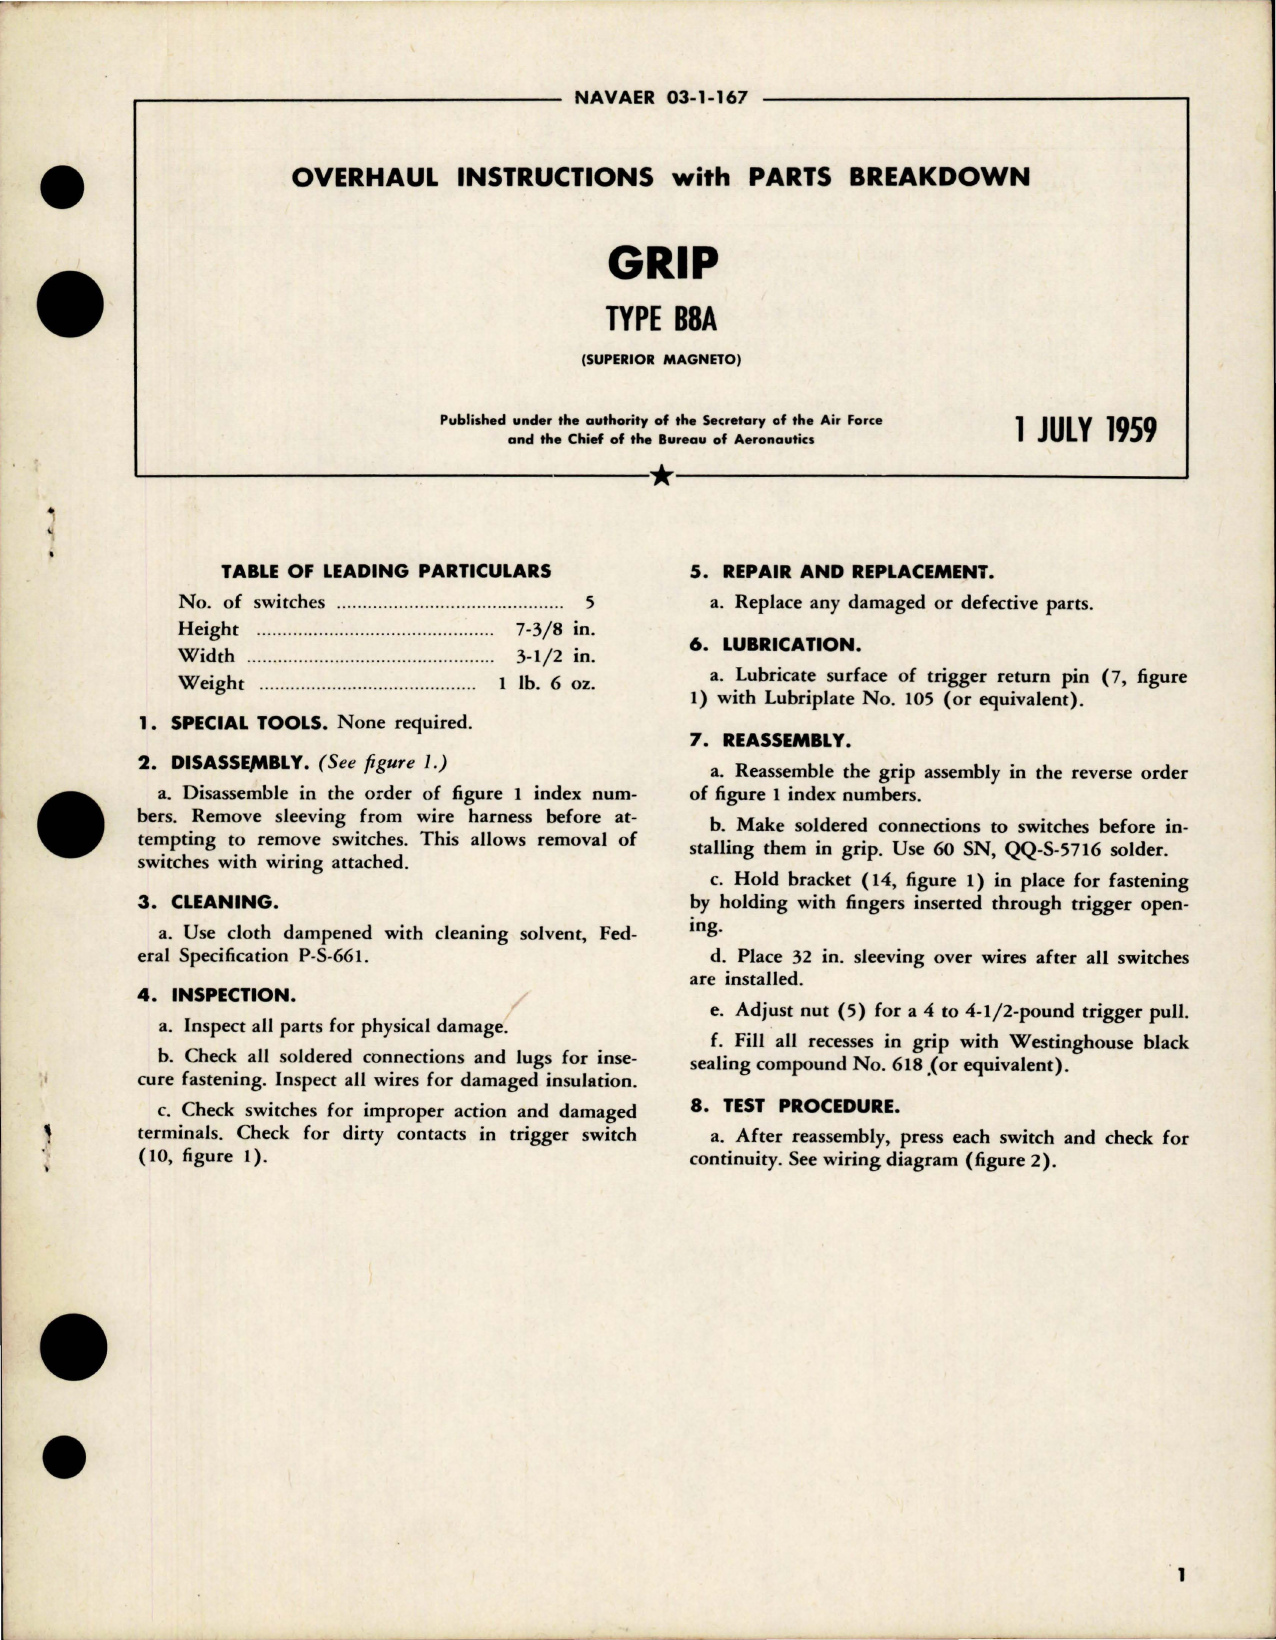 Sample page 1 from AirCorps Library document: Overhaul Instructions with Parts Breakdown for GRIP - Type B8A